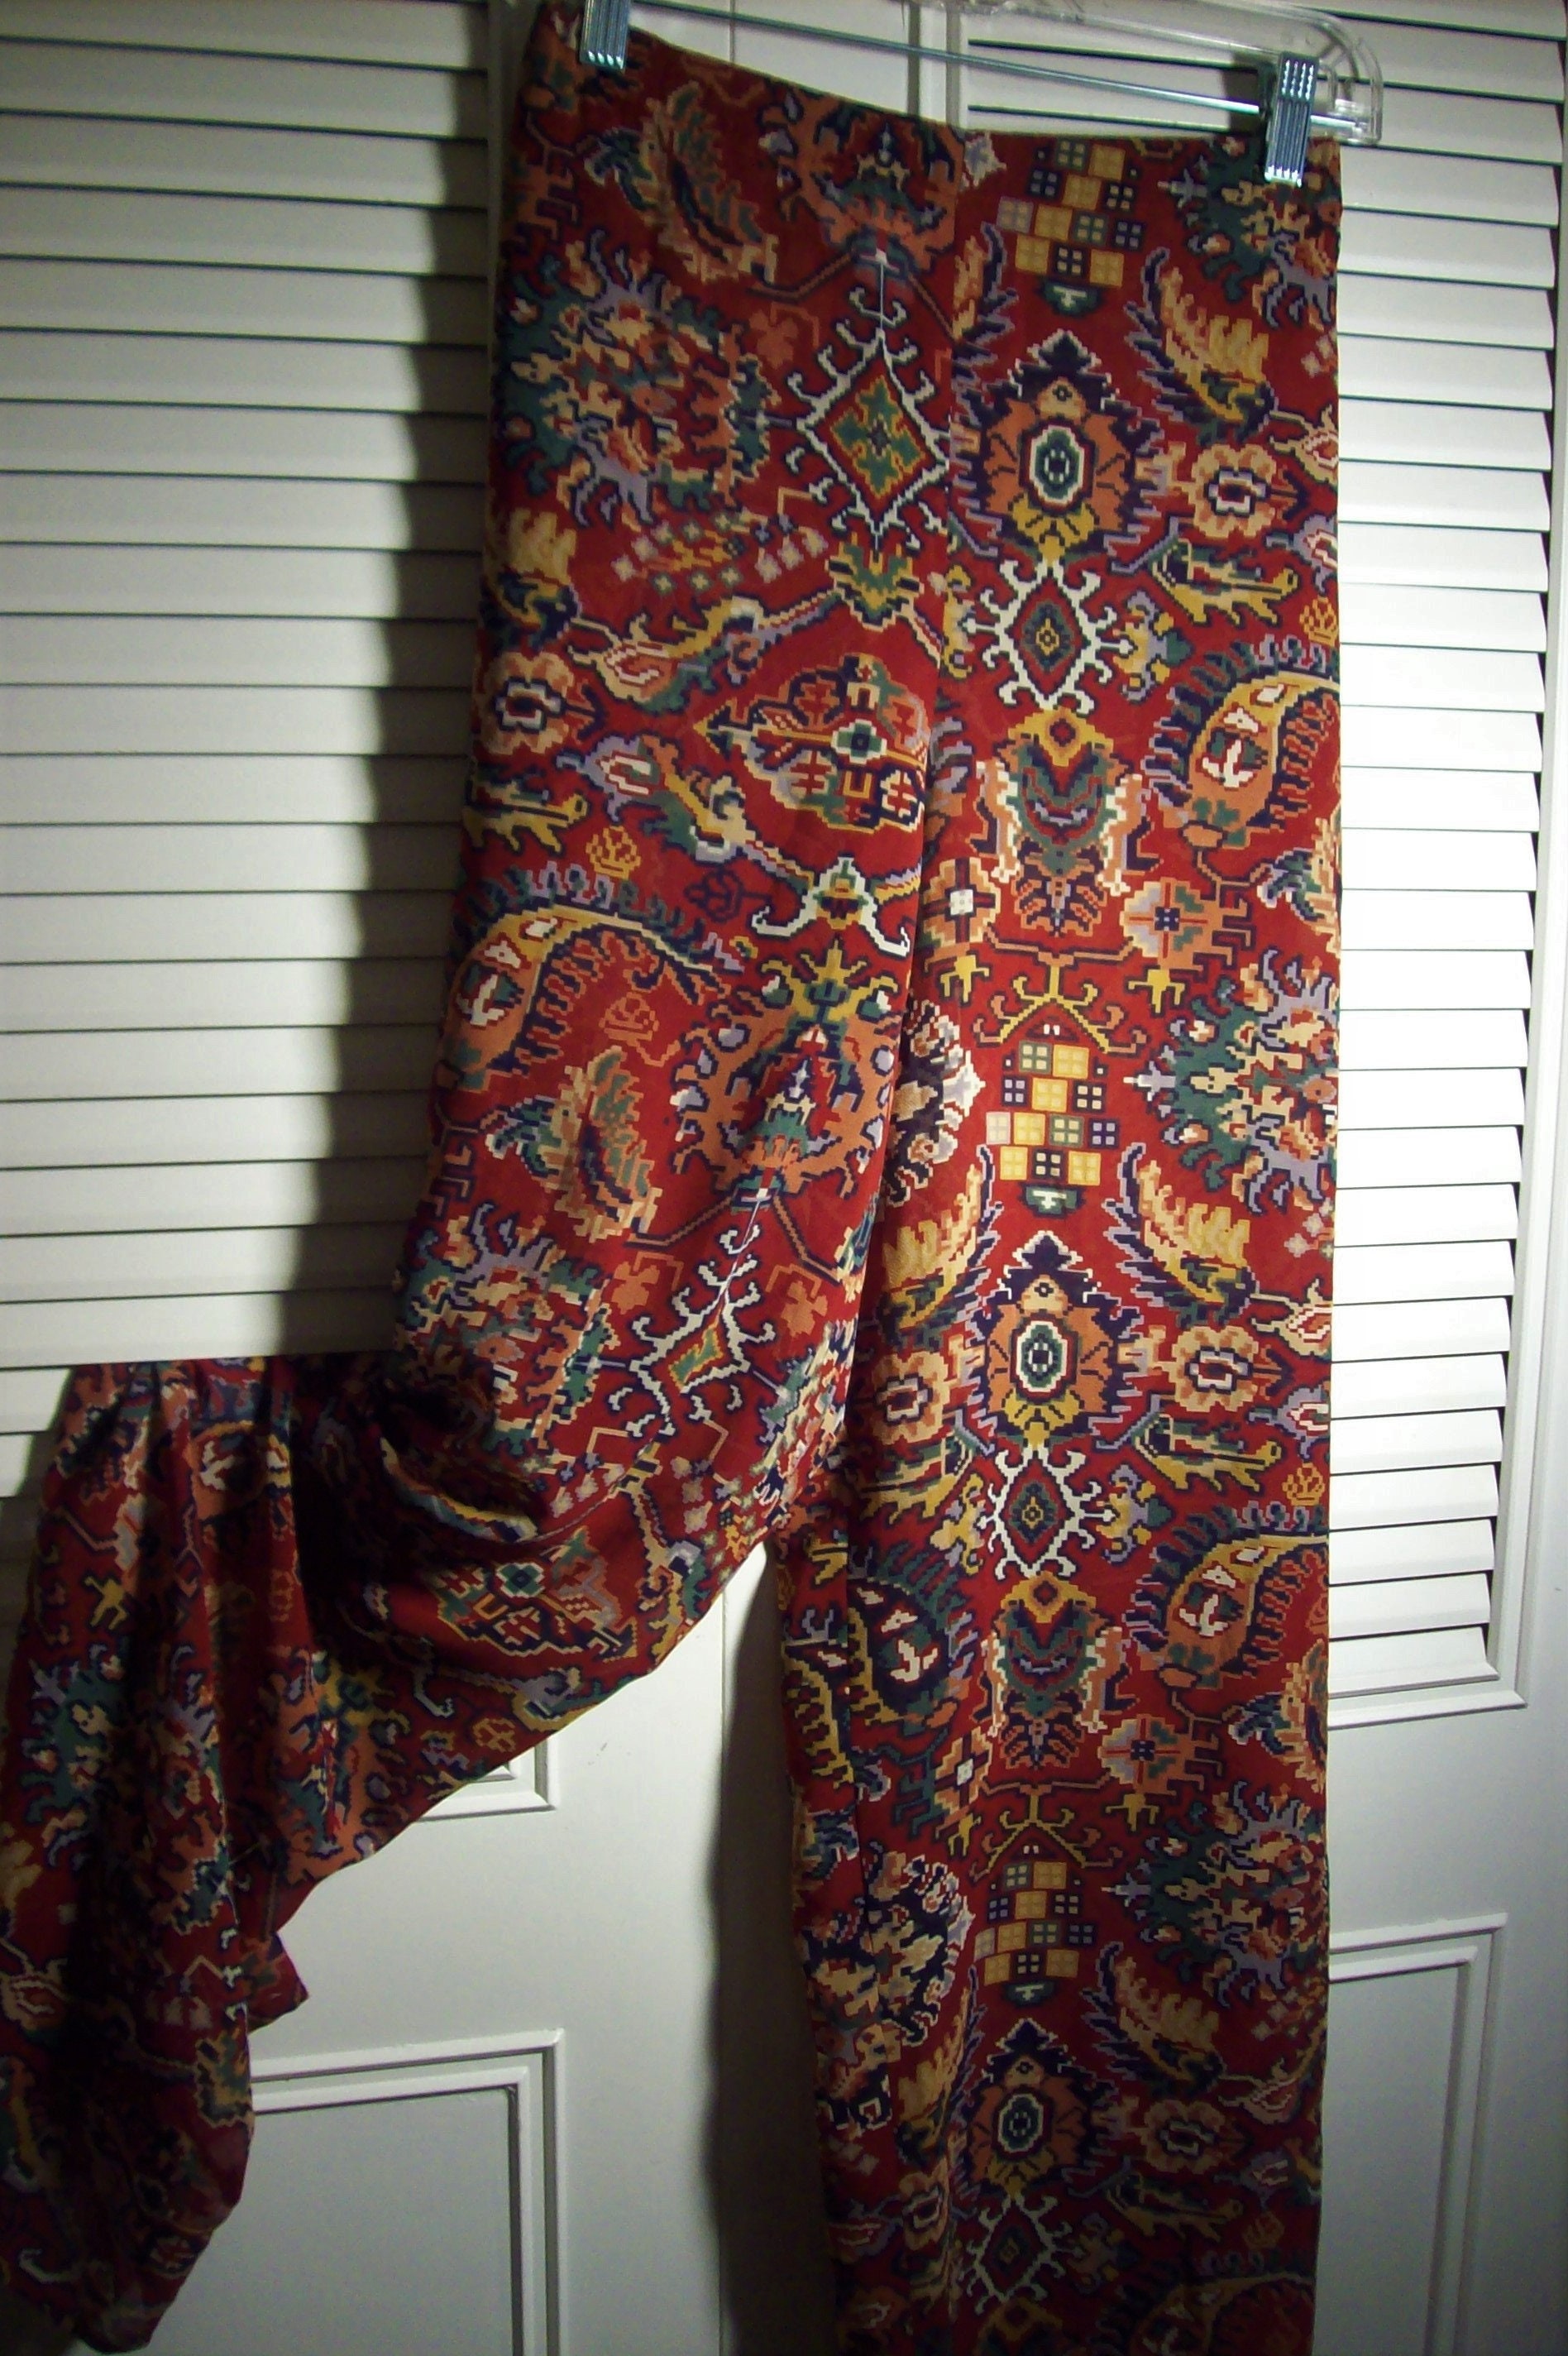 Pants XL, Adrienne Vittadini Paisley Pull-on Pants. Elastic Waist, Poly  Fabric, Pockets, Long Lovely Pants. See Details 